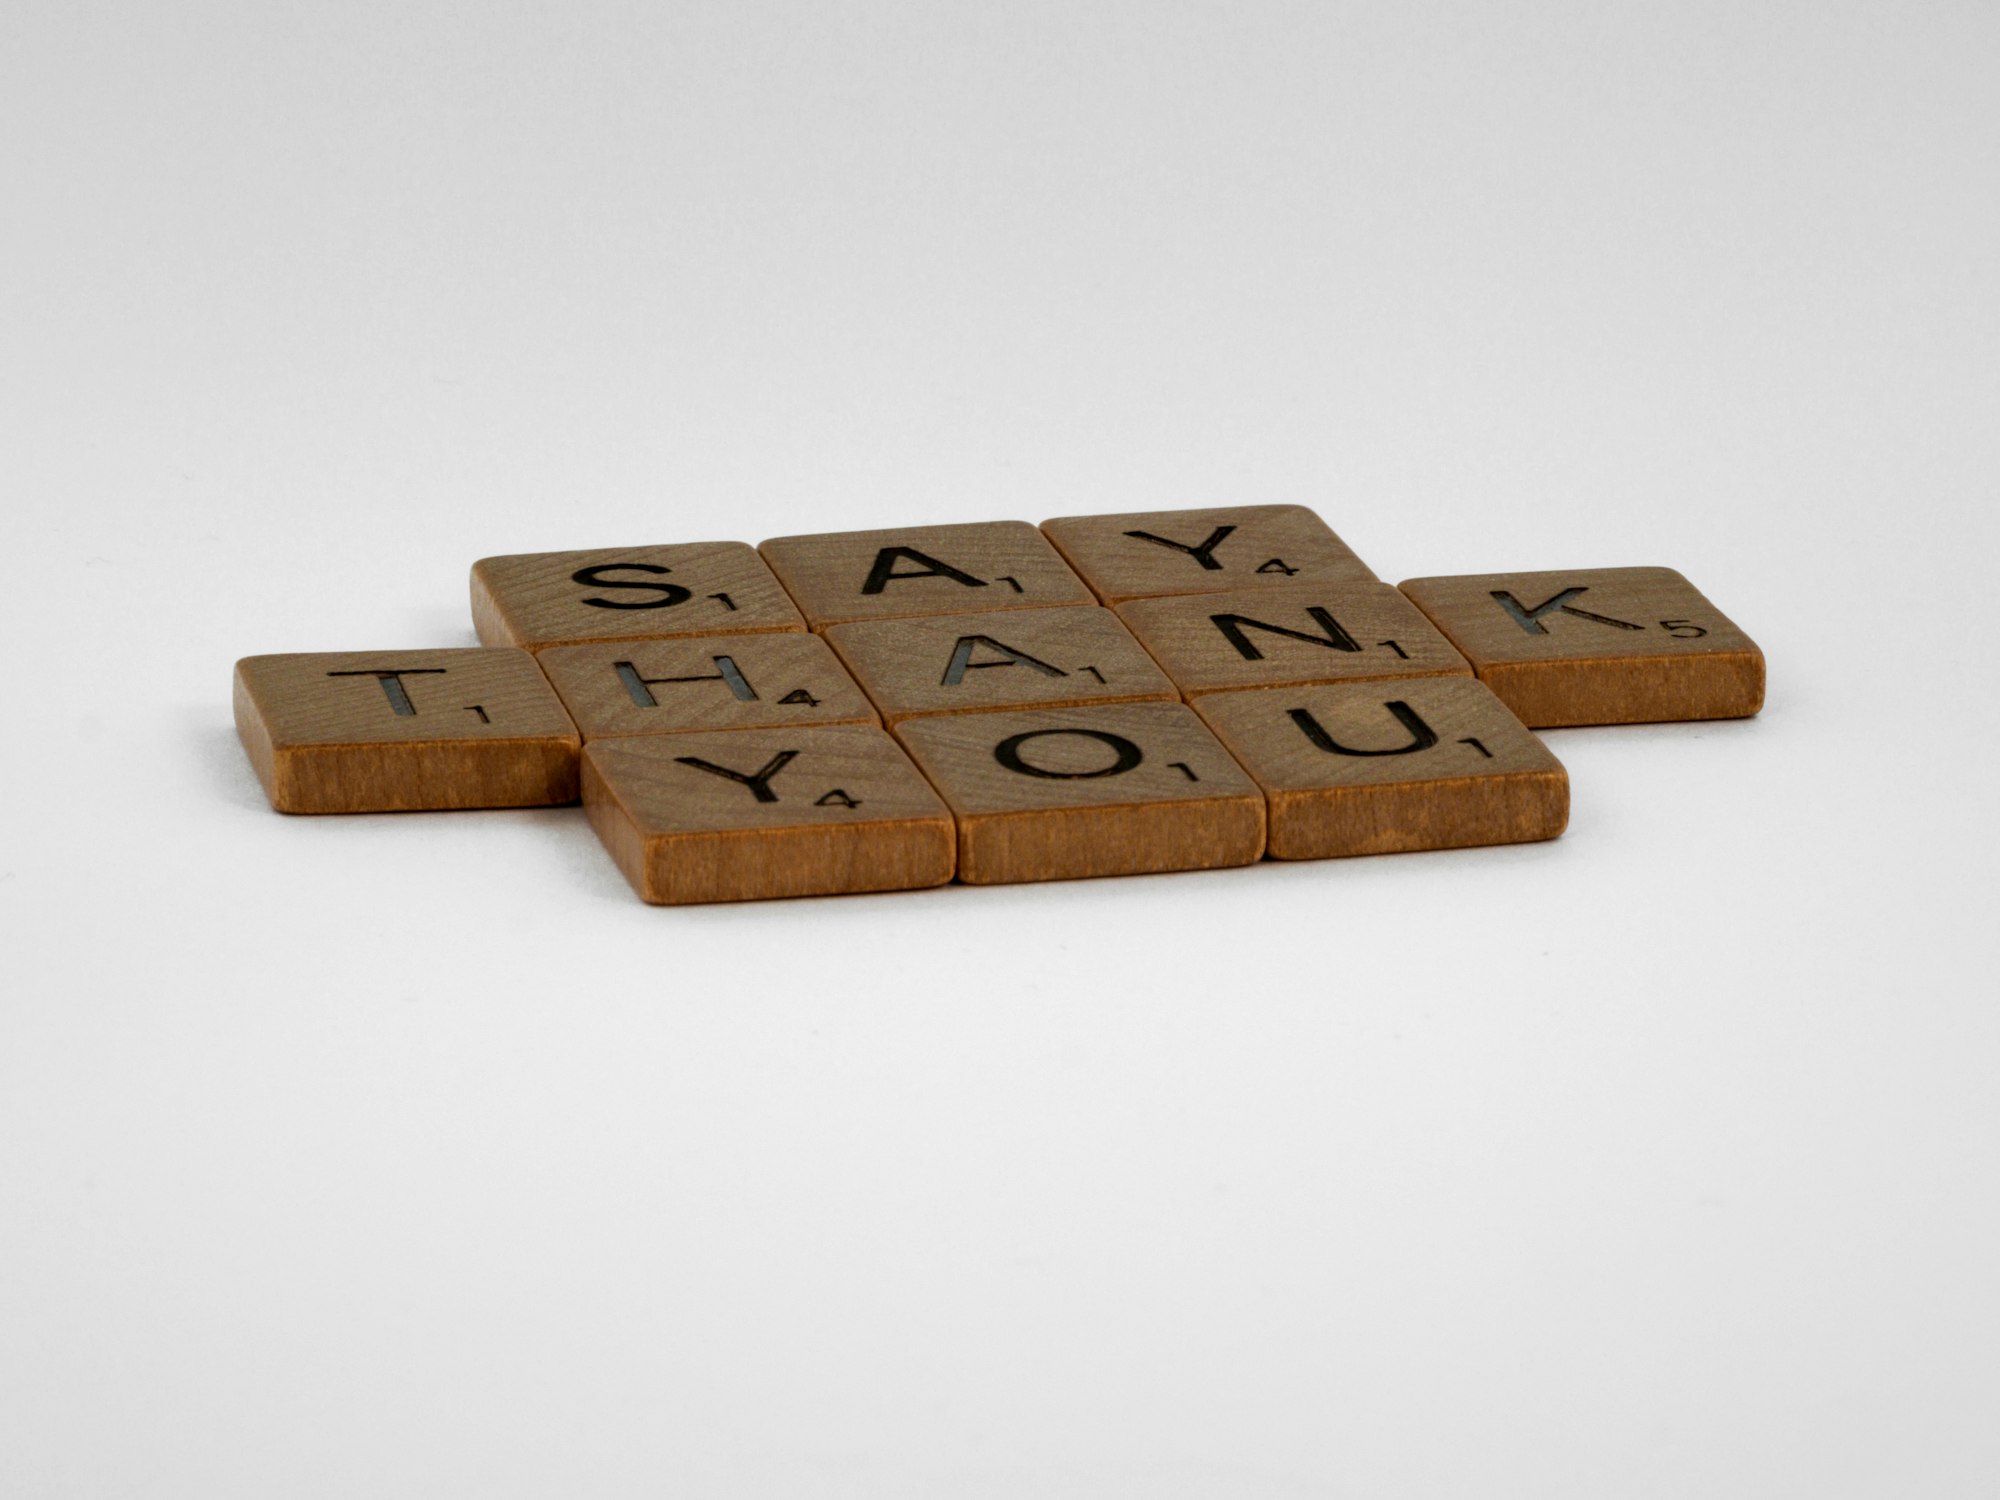 scrabble, scrabble pieces, lettering, letters, wood, scrabble tiles, white background, words, quote, letters, type, typography, design, layout, focus, bokeh, blur, photography, images, image, thank you, say thank you, gratitude, be grateful, show your gratitude, polite, etiquette, small things, costs nothing, a thank you costs nothing, play nice, thanks, give thanks, 